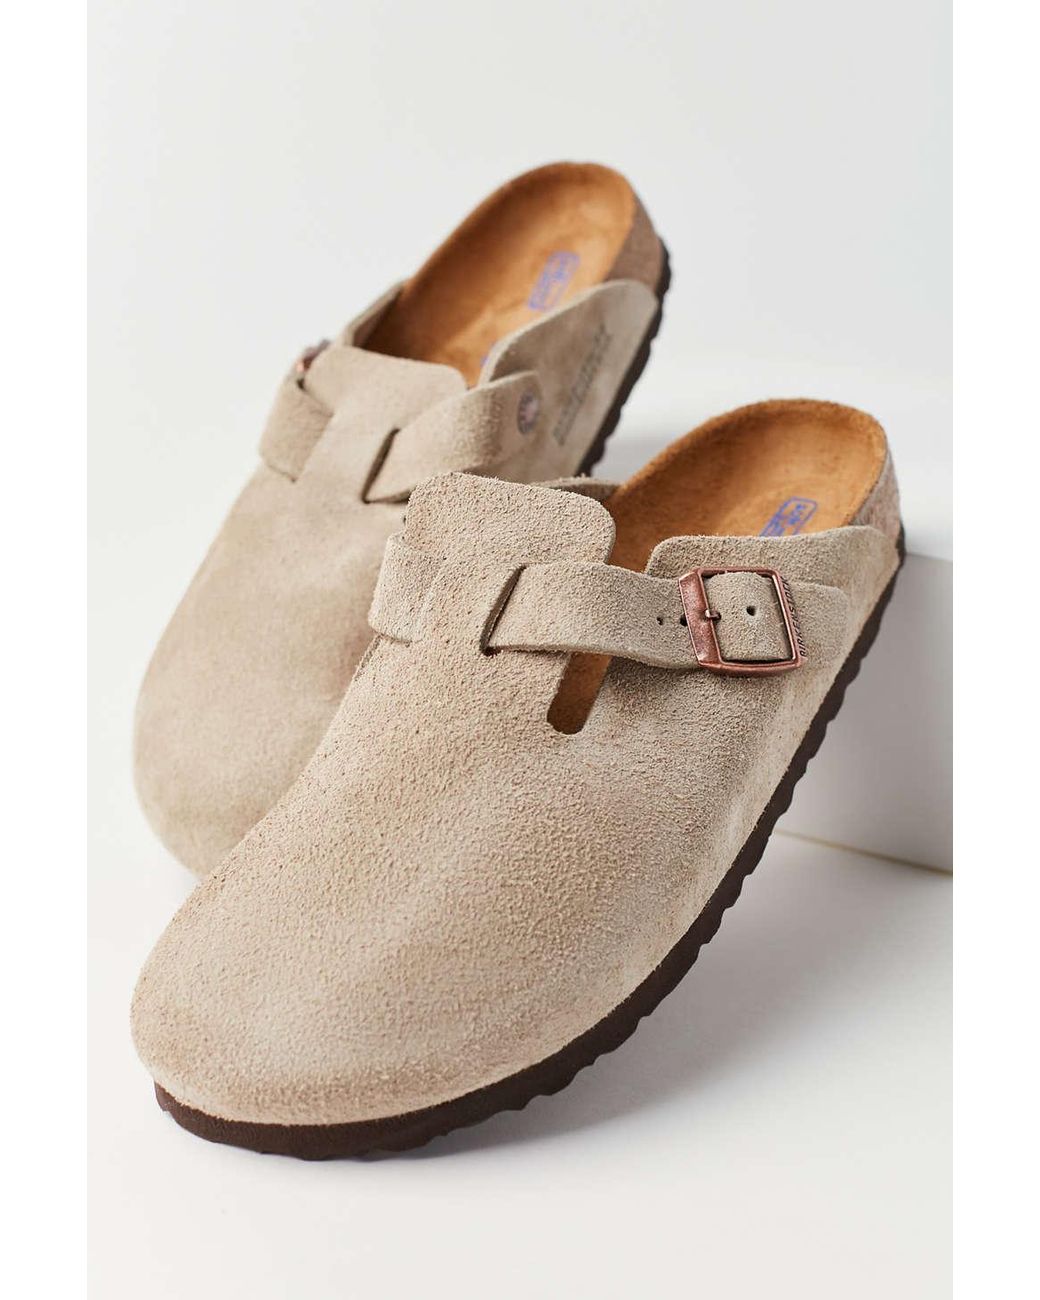 Birkenstock Boston Soft Footbed Suede Clog In Taupe At Urban Outfitters in  Natural | Lyst